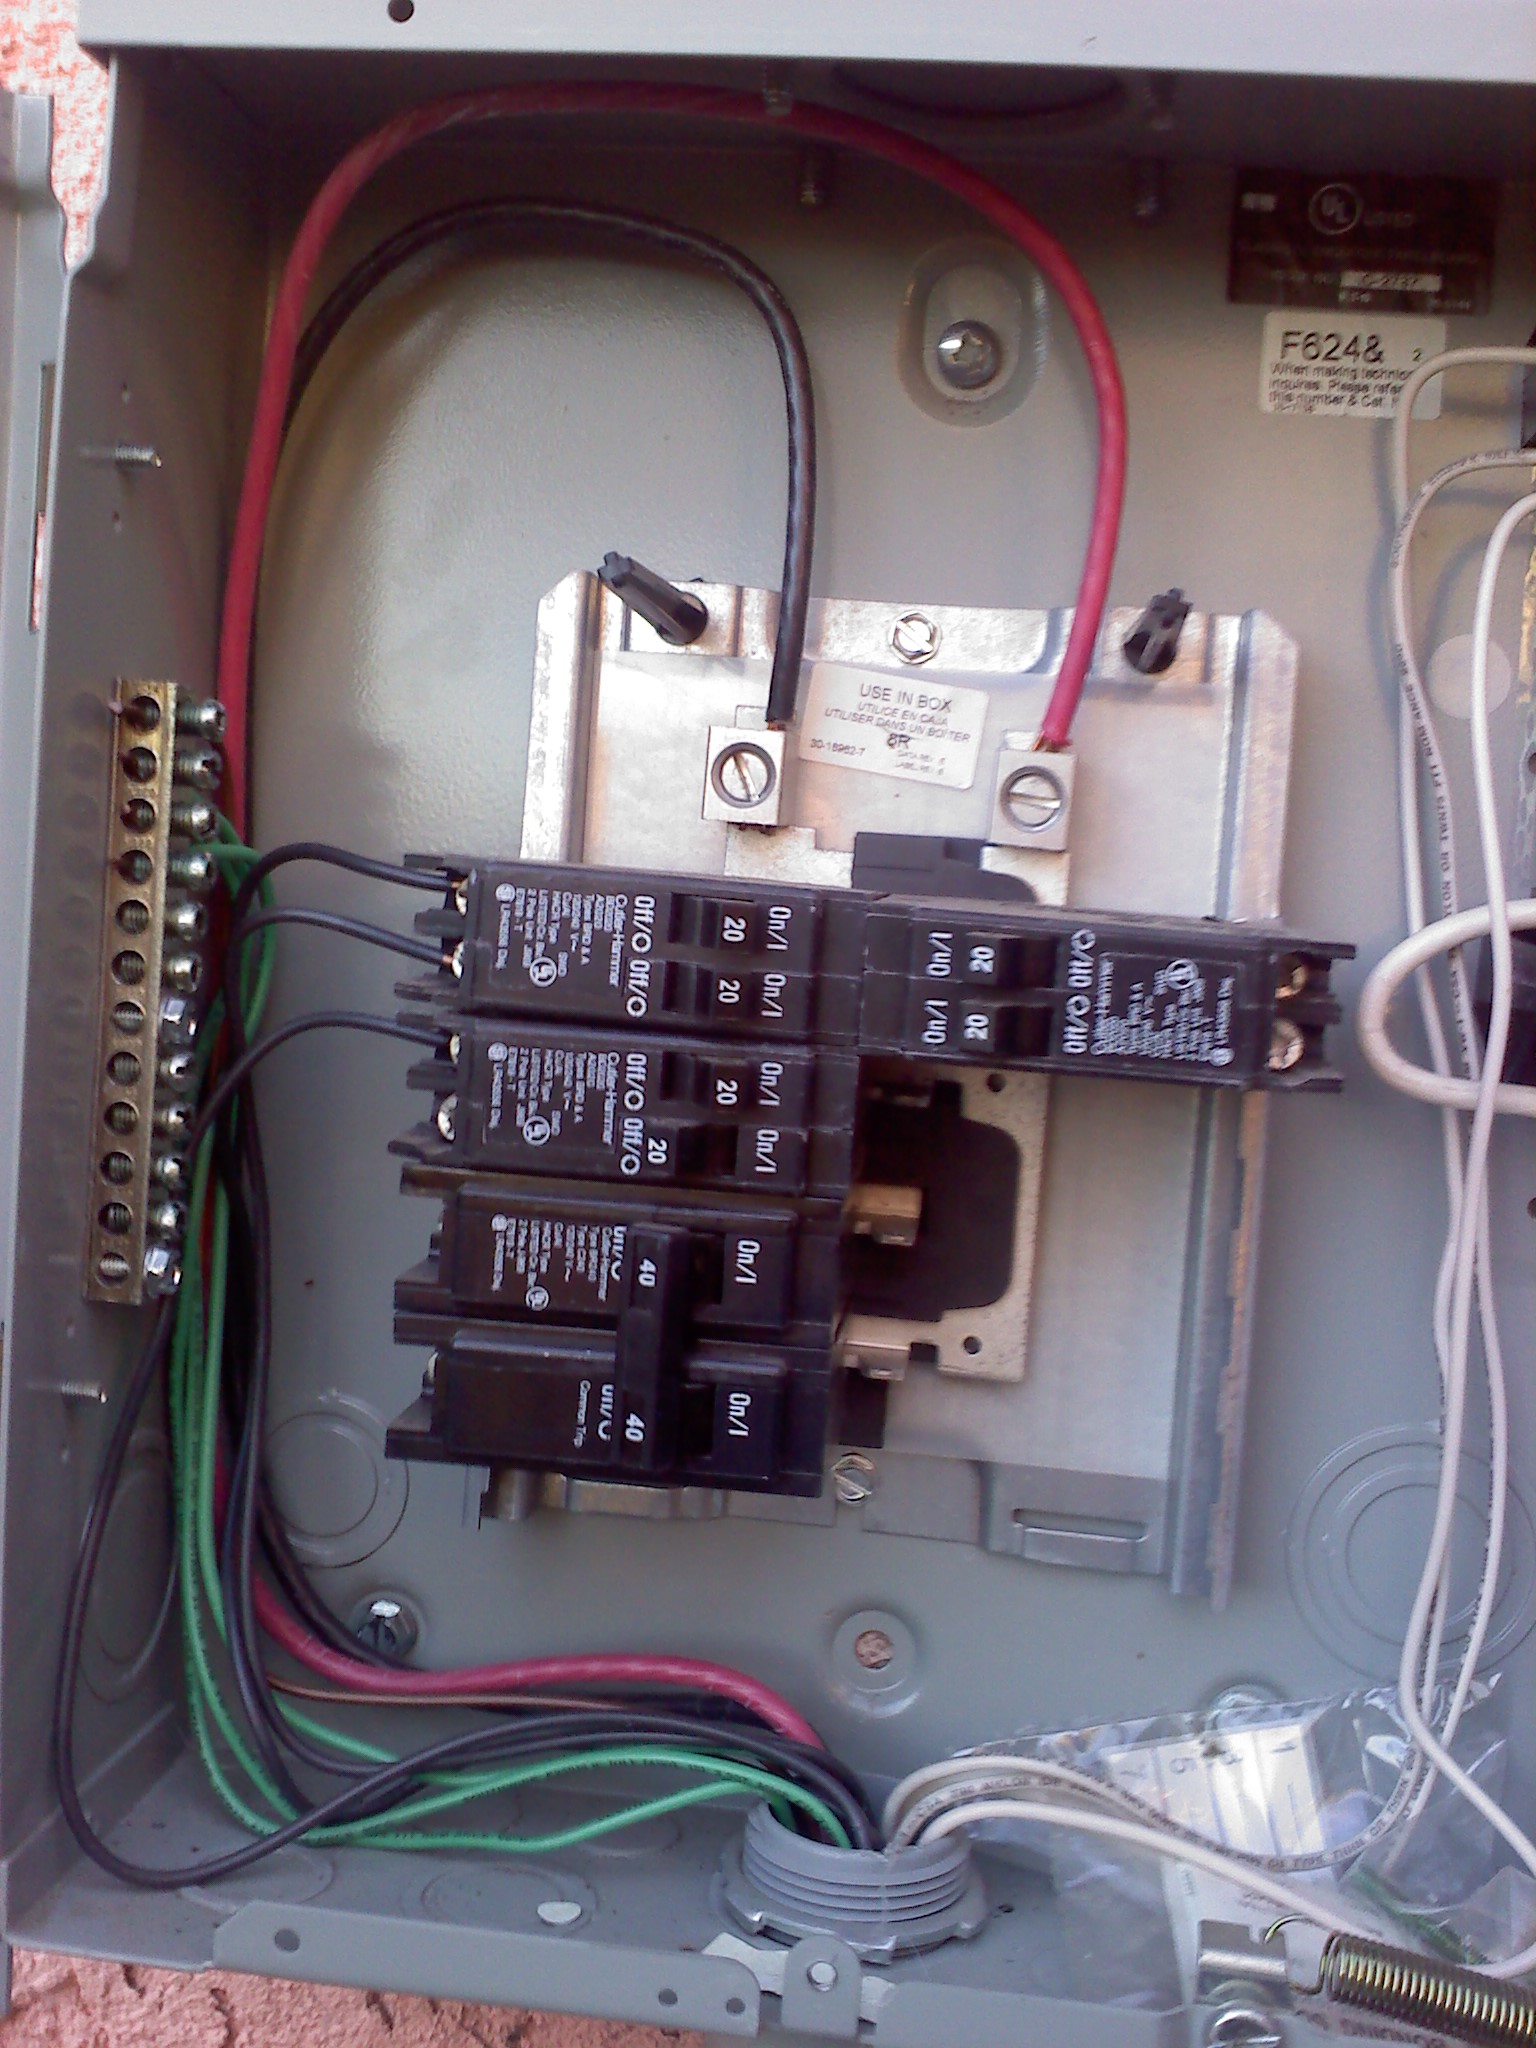 Sub Panel Wiring Diagram Sub Panel Wiring Code Wiring Diagram Project